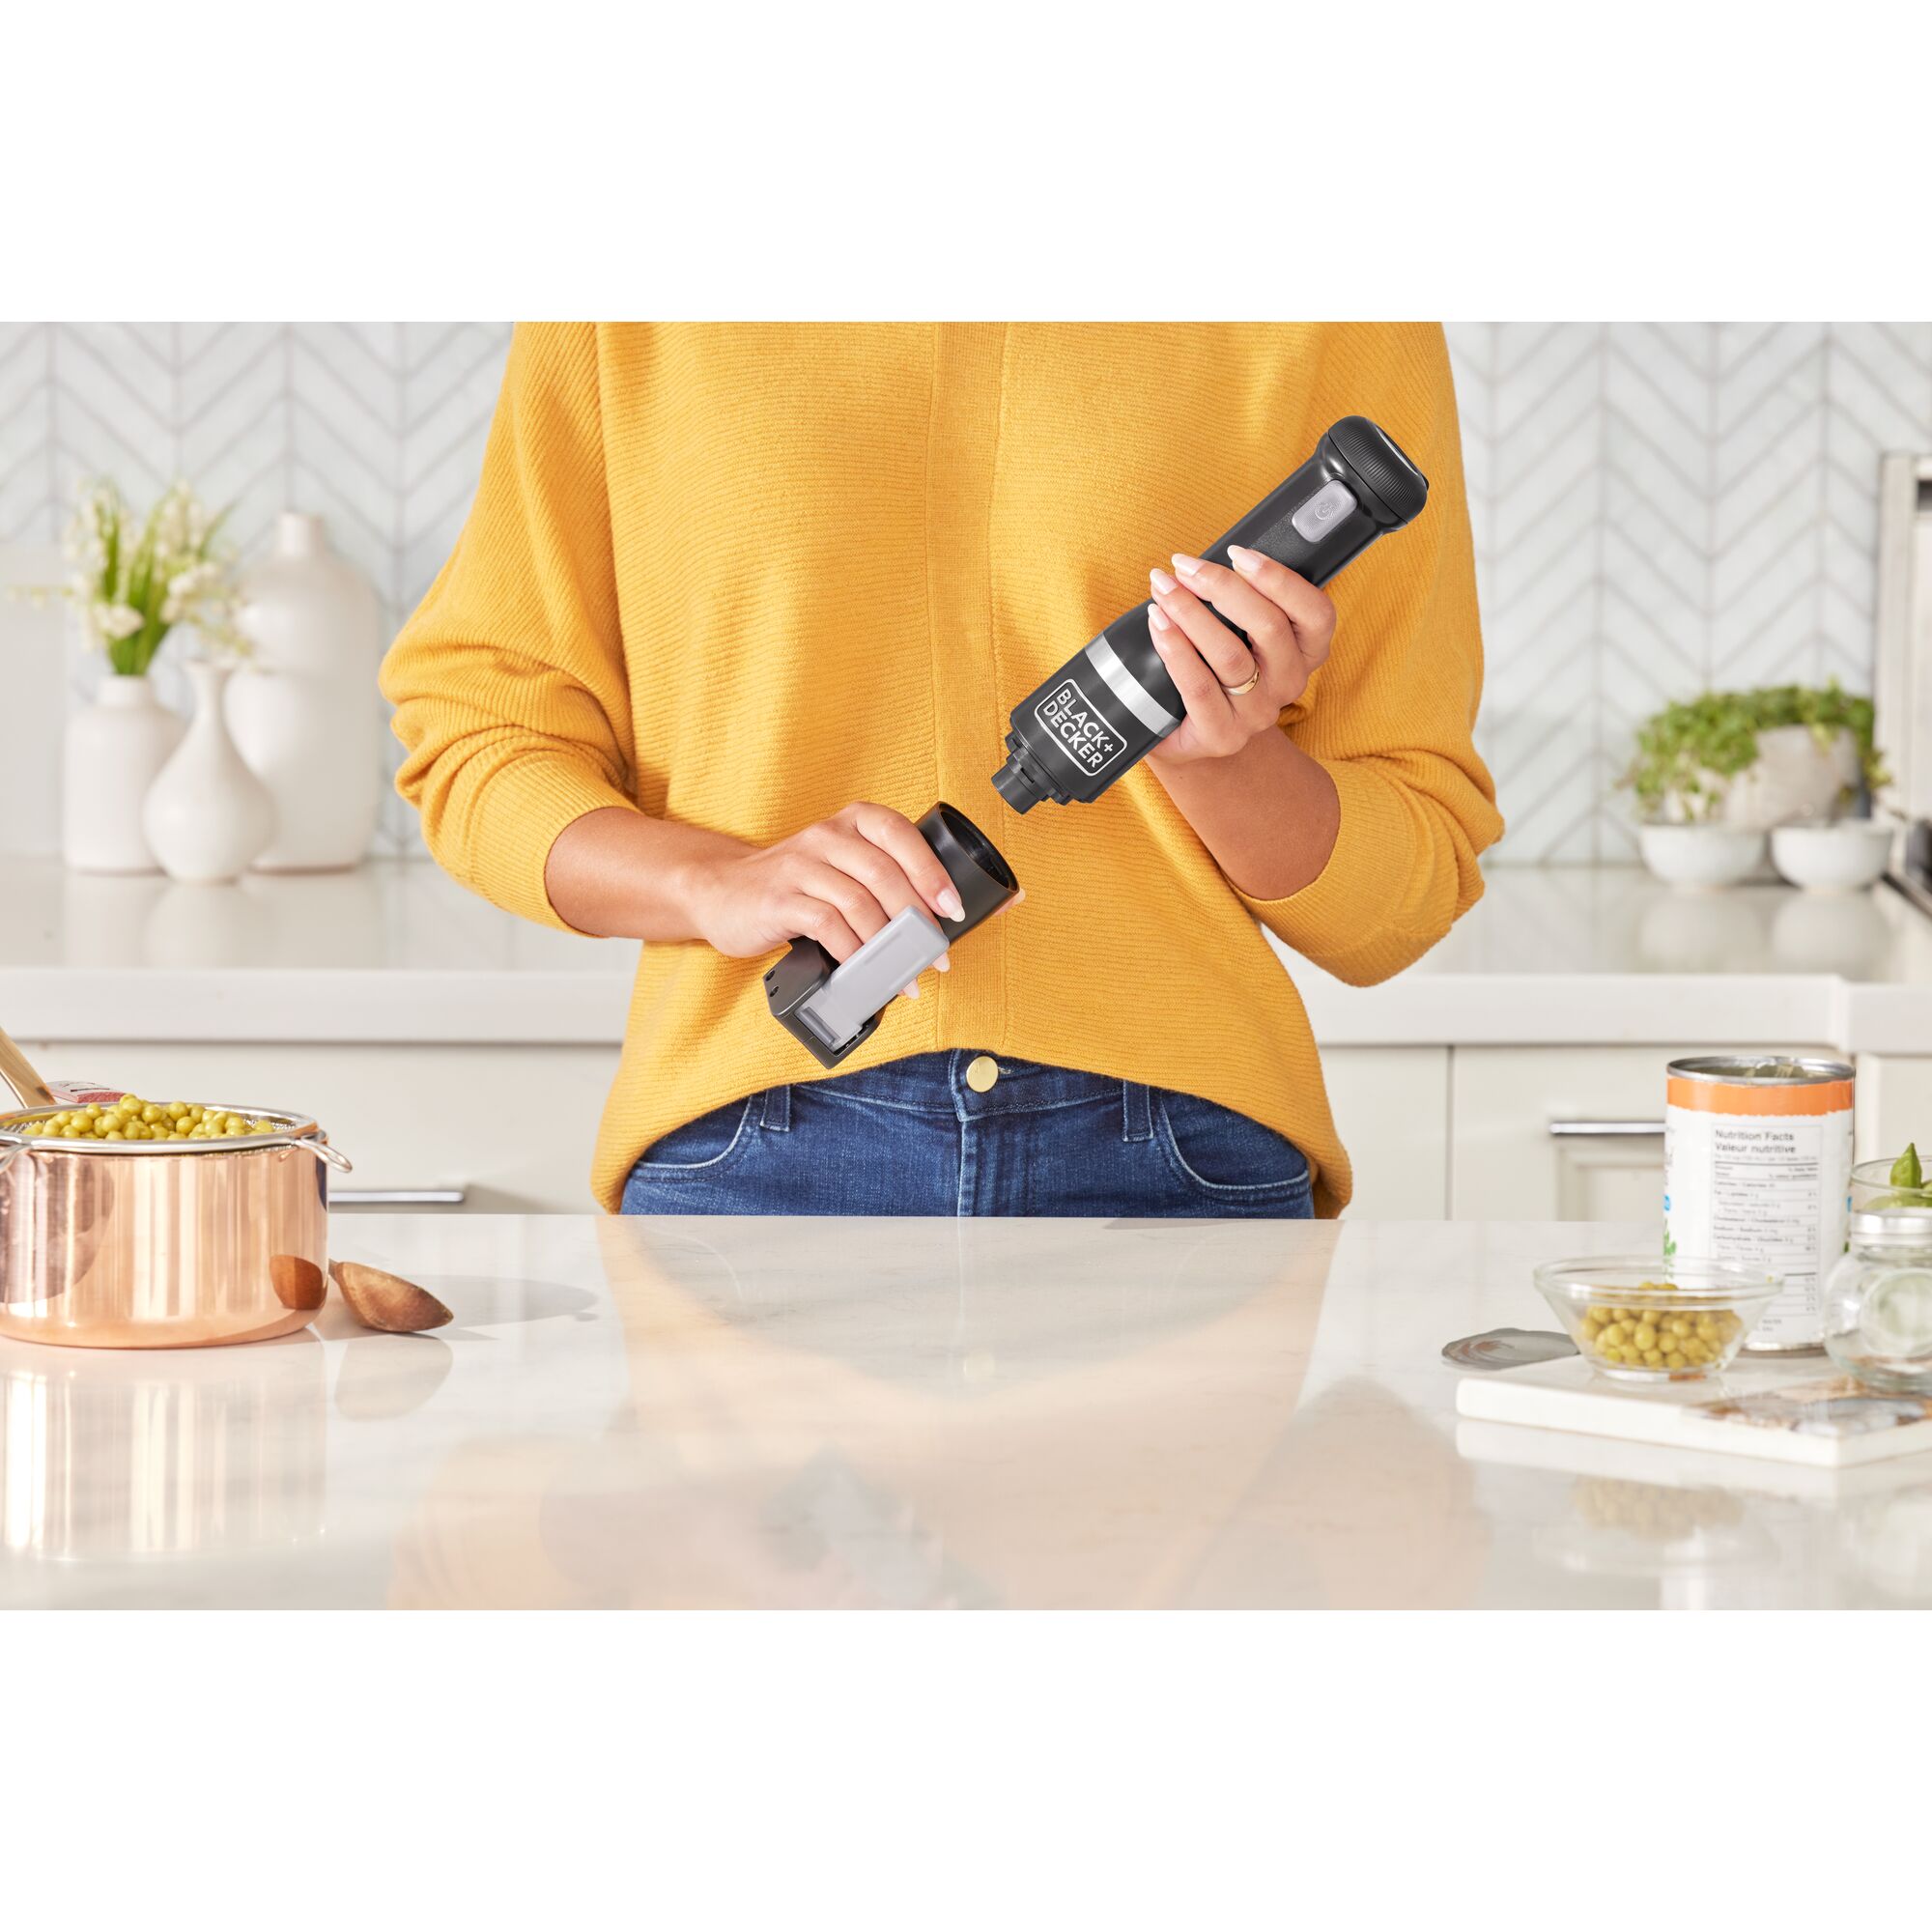 Talent showing how to attach the BLACK+DECKER kitchen wand can opener attachment to the black power unit